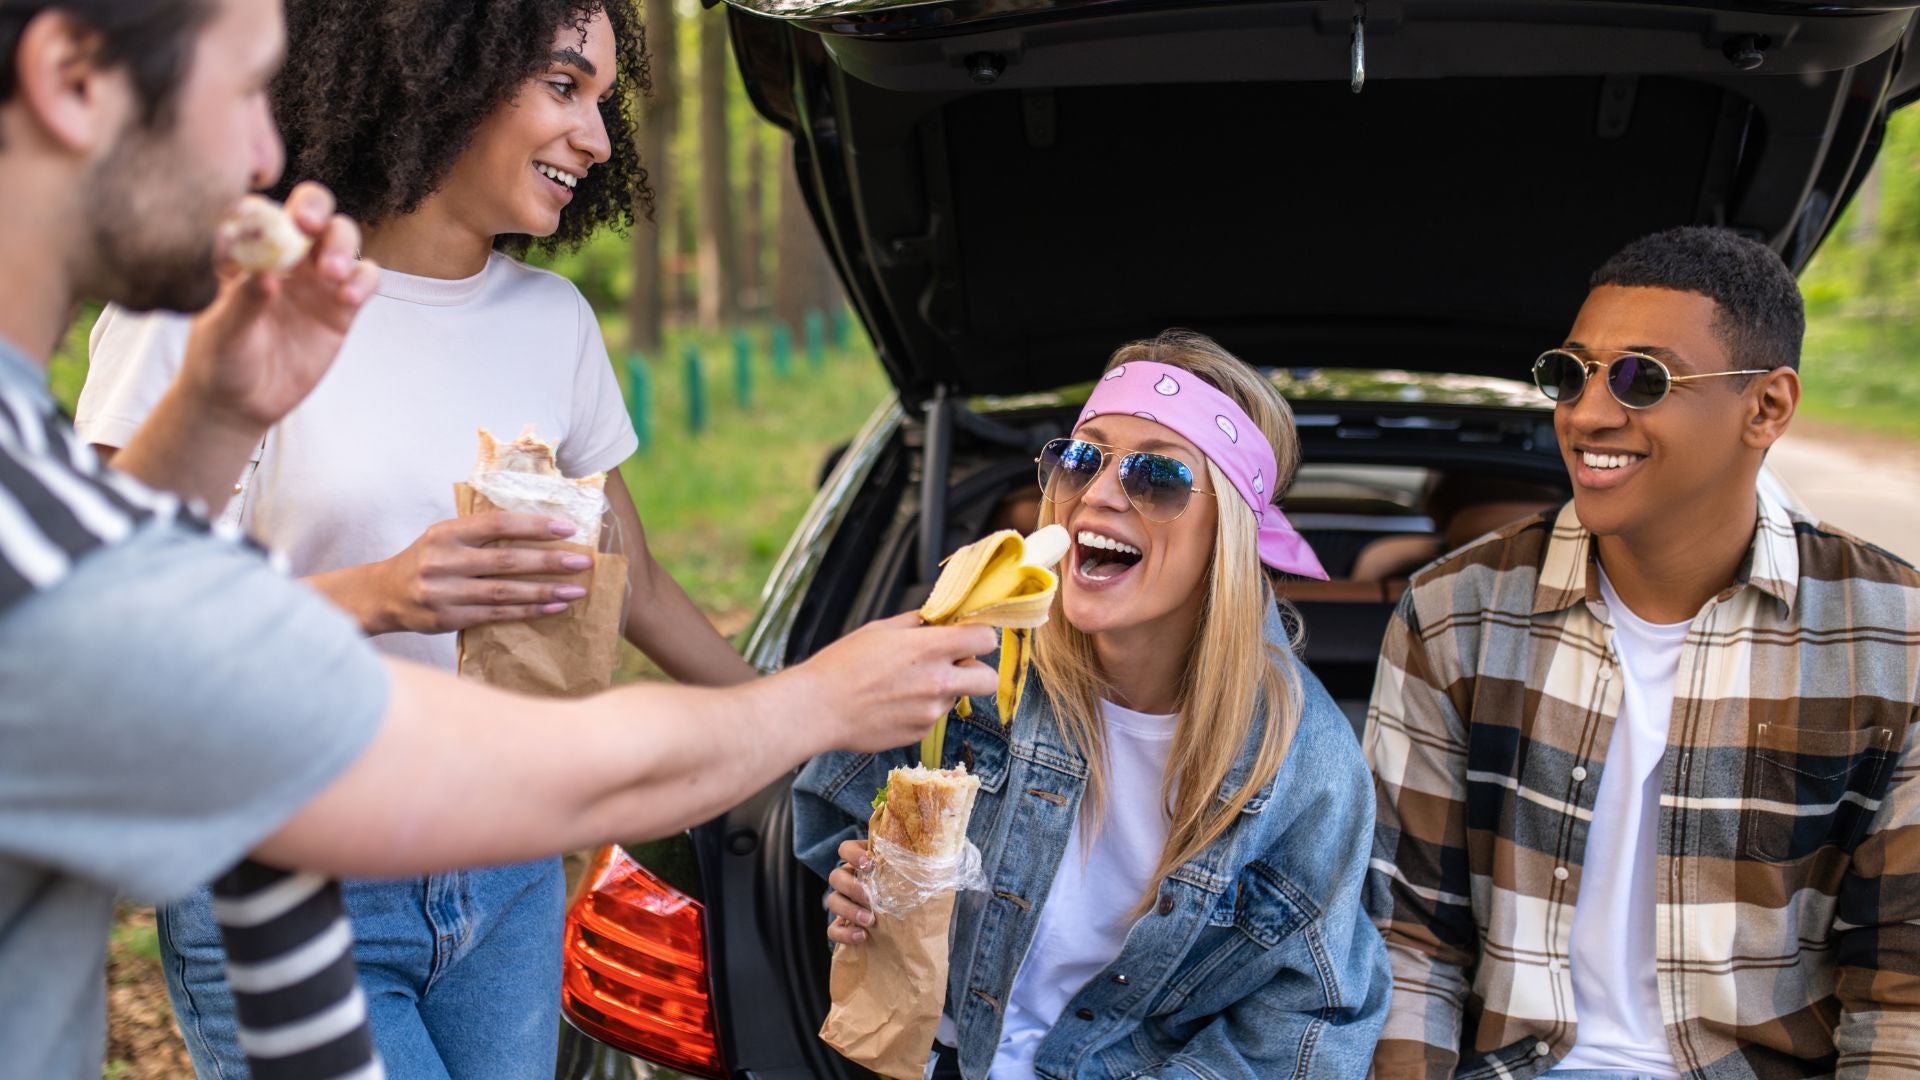 People tailgating. Try these healthy snack swaps. Rivalz plant-based snacks. 